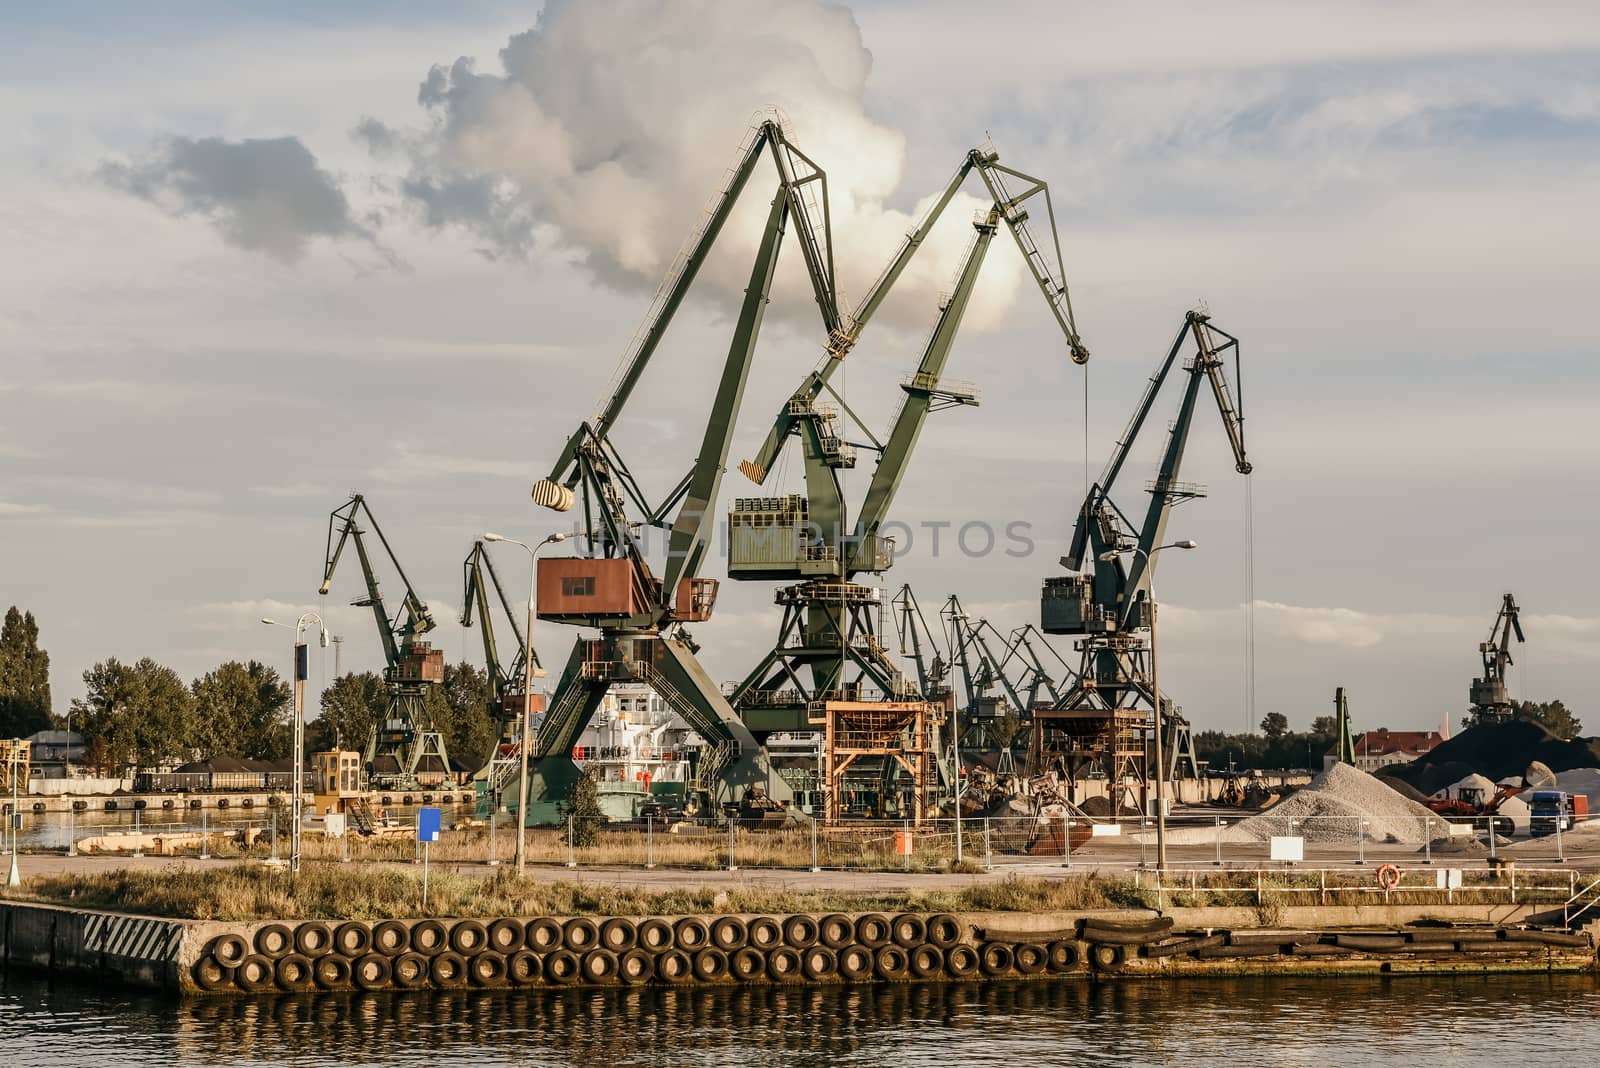 Big container cranes in the port of Gdansk, Poland in different scenery